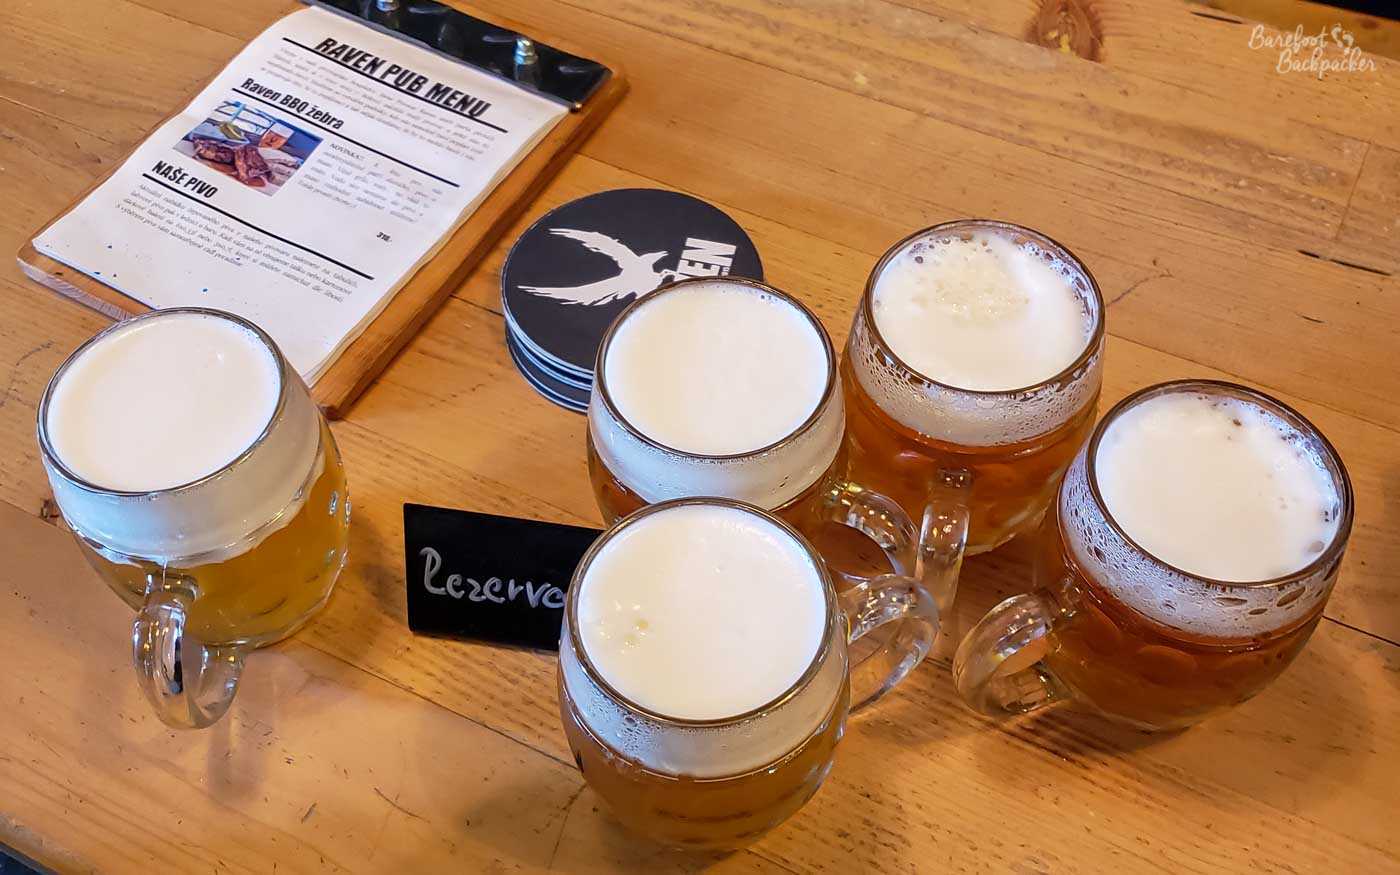 Five glasses of beer, with foam heads, are on a table. Also on the table are a clipboard menu and a series of beer mats, both advertising the fact this the Raven Brewery.